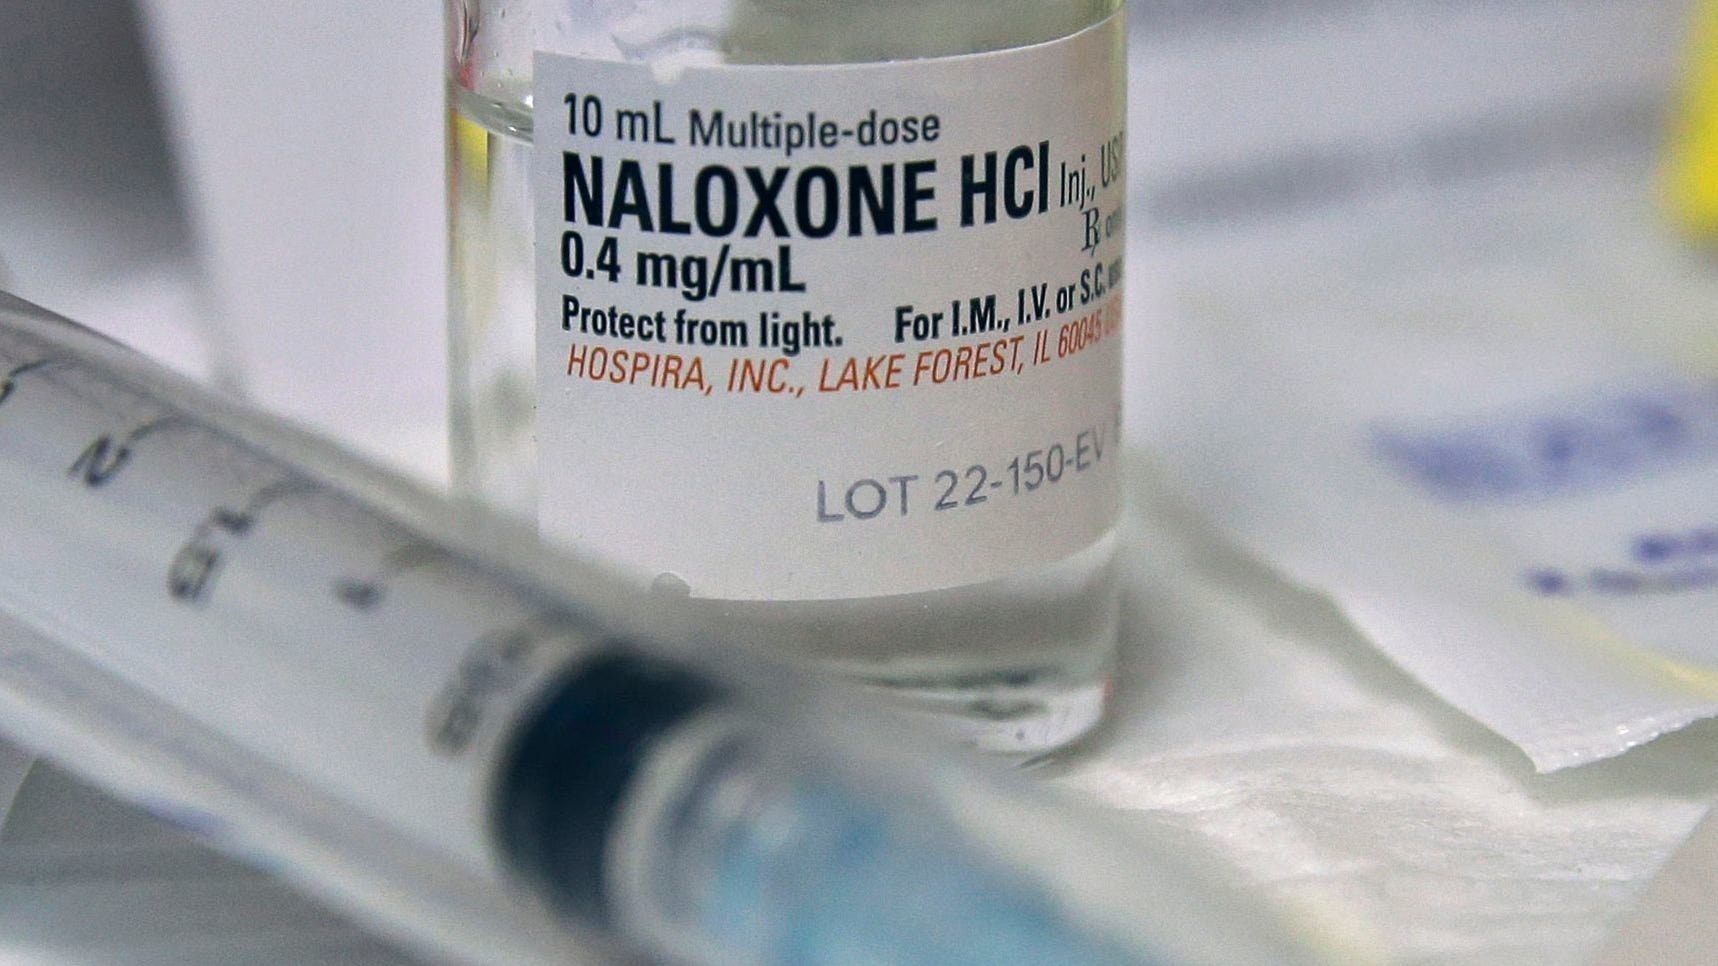 'It's a no-brainer': Rising adolescent overdoses prompt calls for schools to stock naloxone